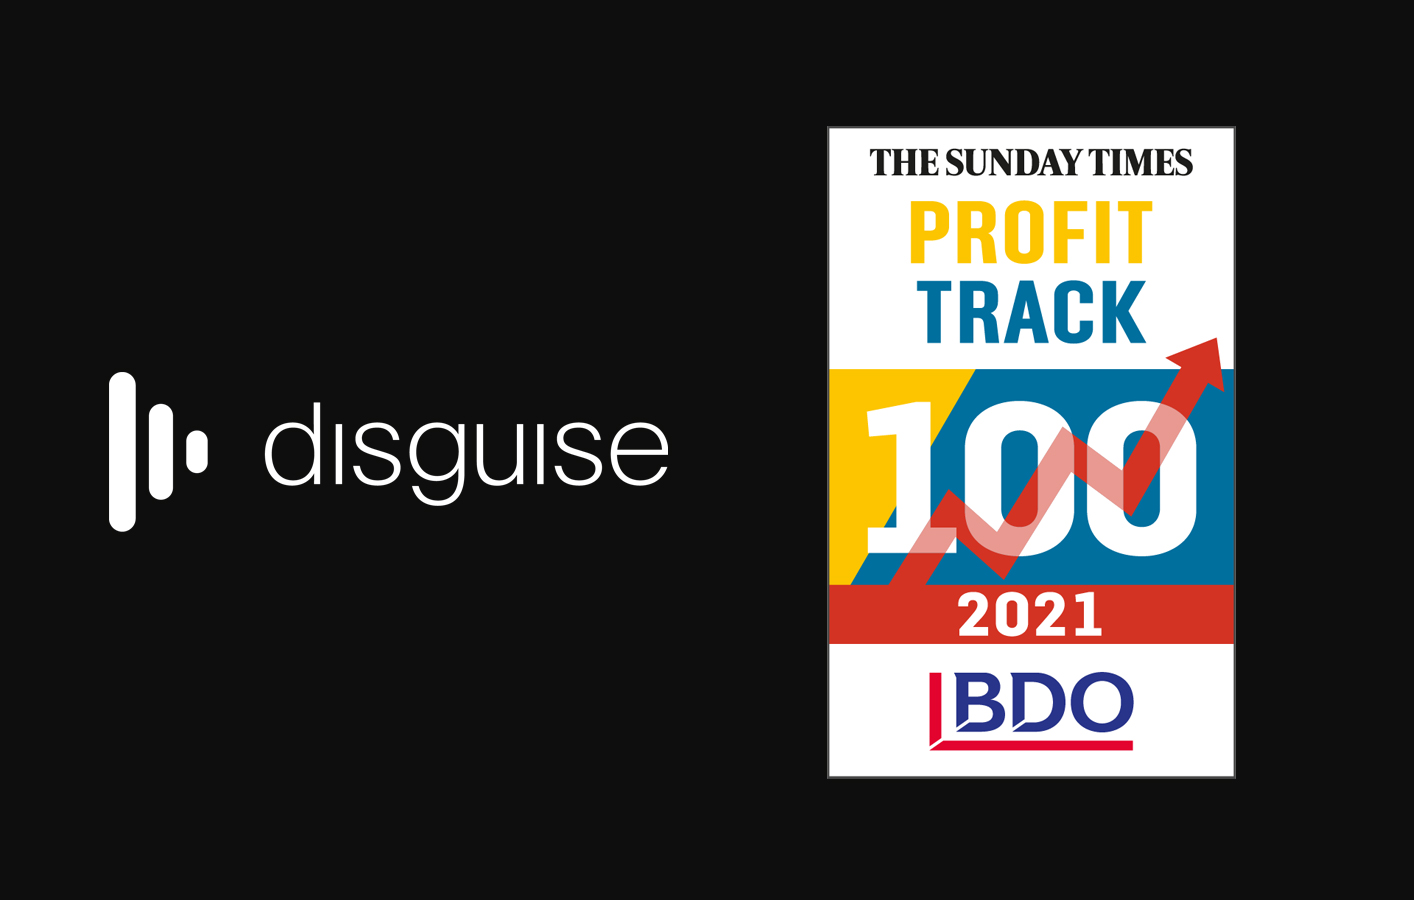 disguise recognised by Sunday Times BDO Profit Track 100